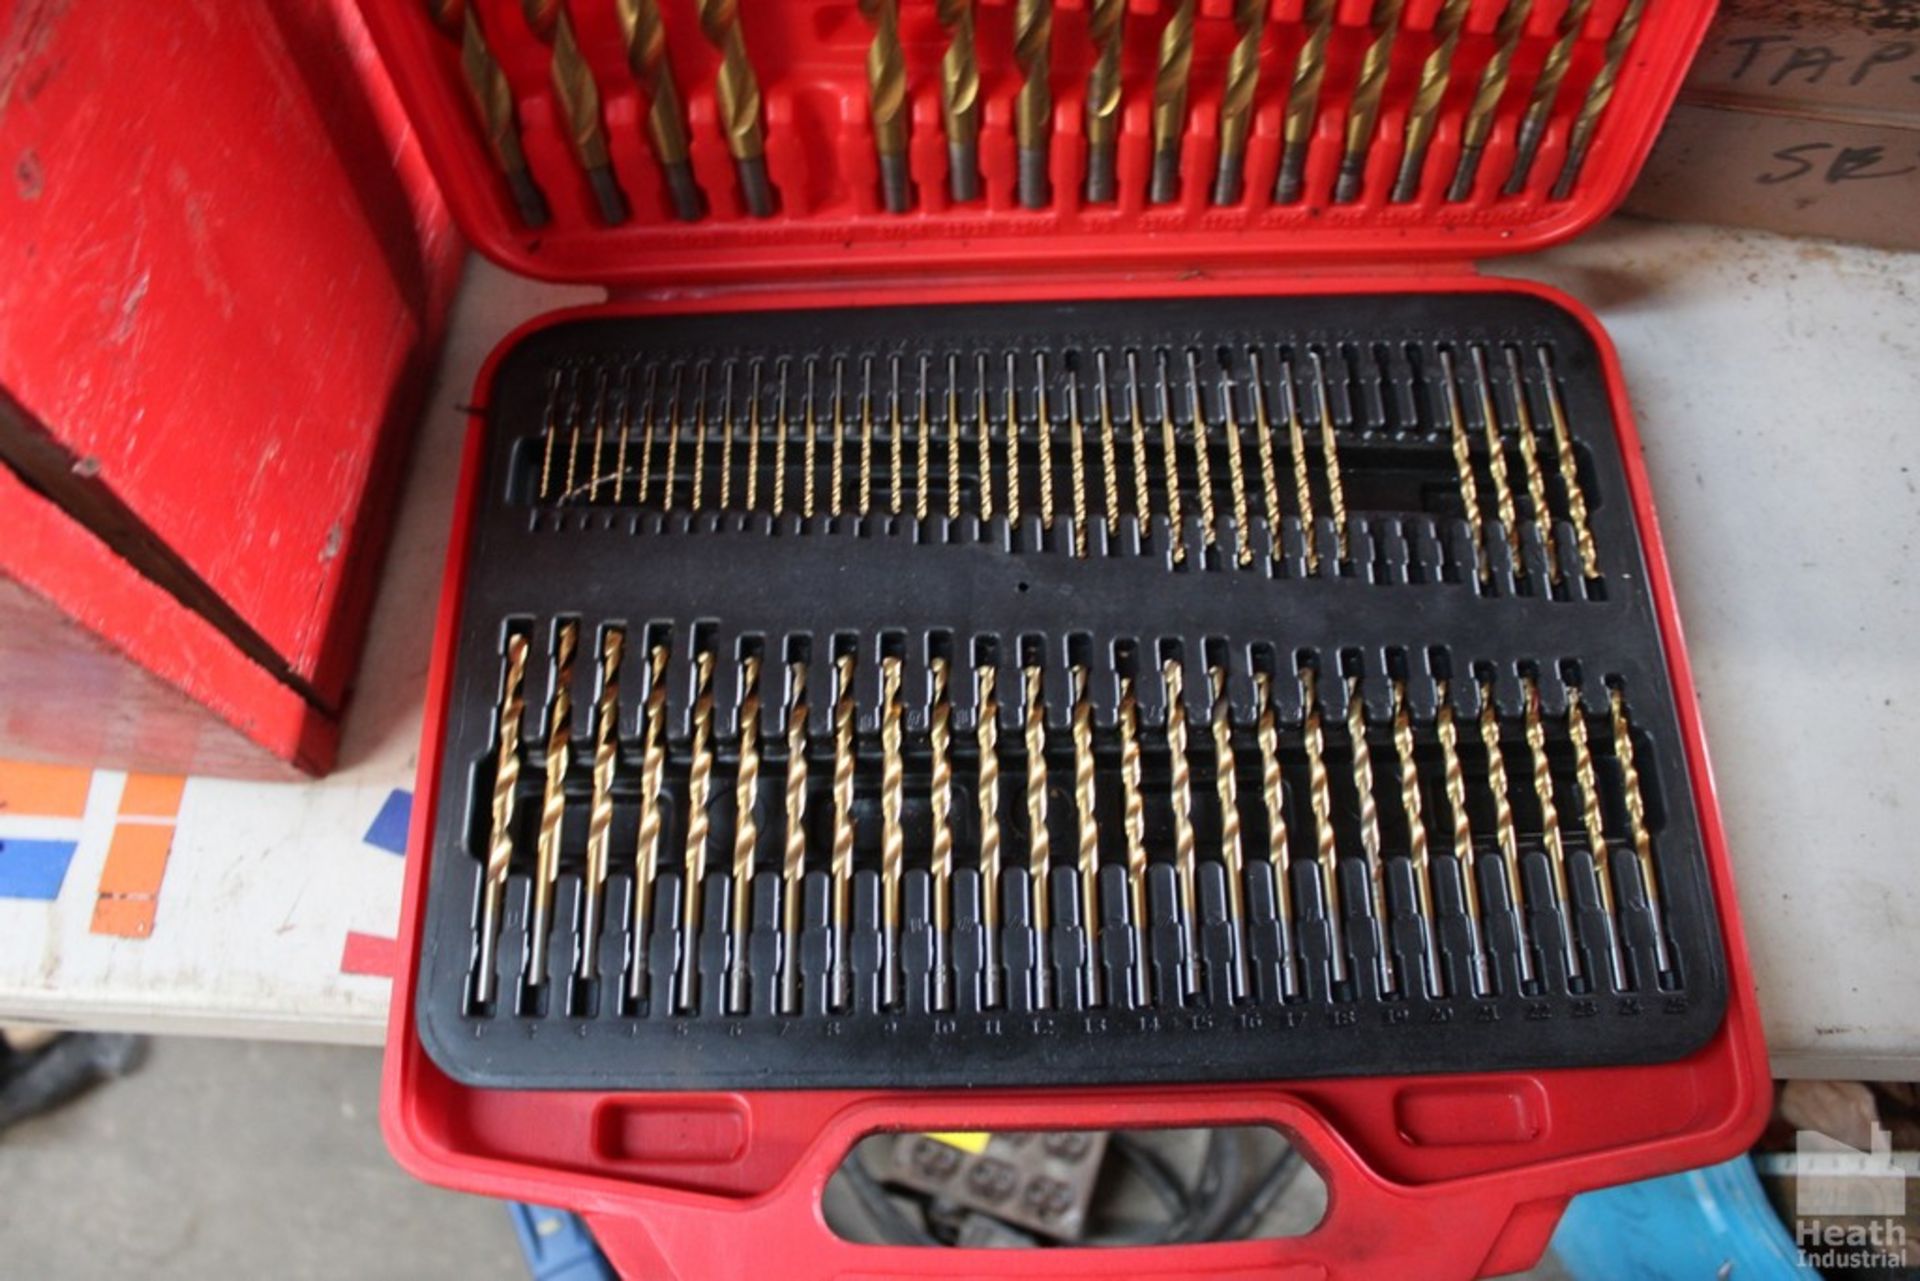 HIGH-SPEED DRILL BIT SET IN CASE, SOME MISSING - Image 2 of 2